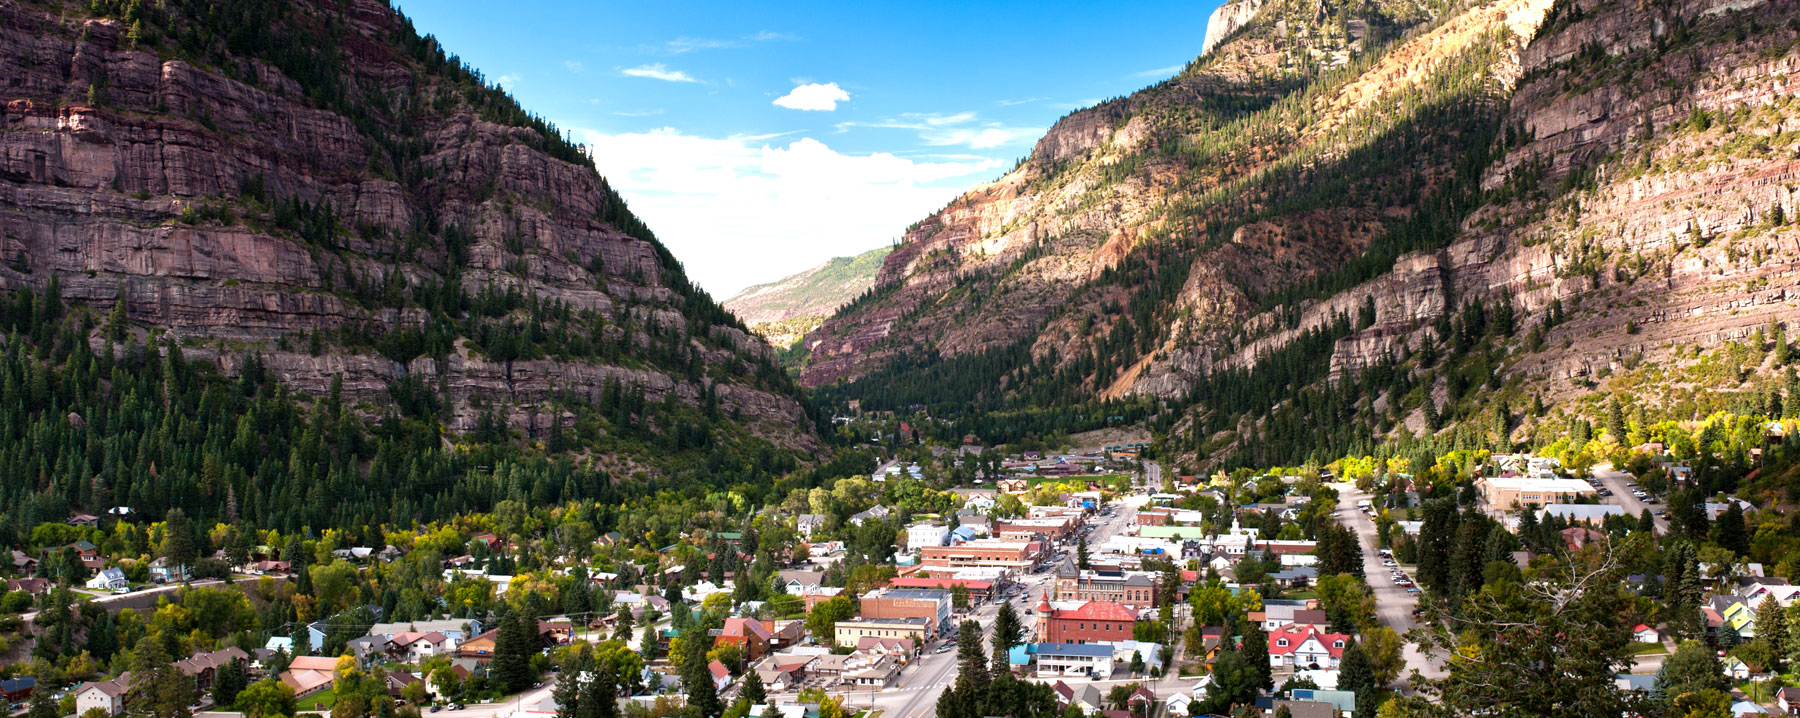 Best off-the-beaten-path CO getaways for Denverites: Ouray